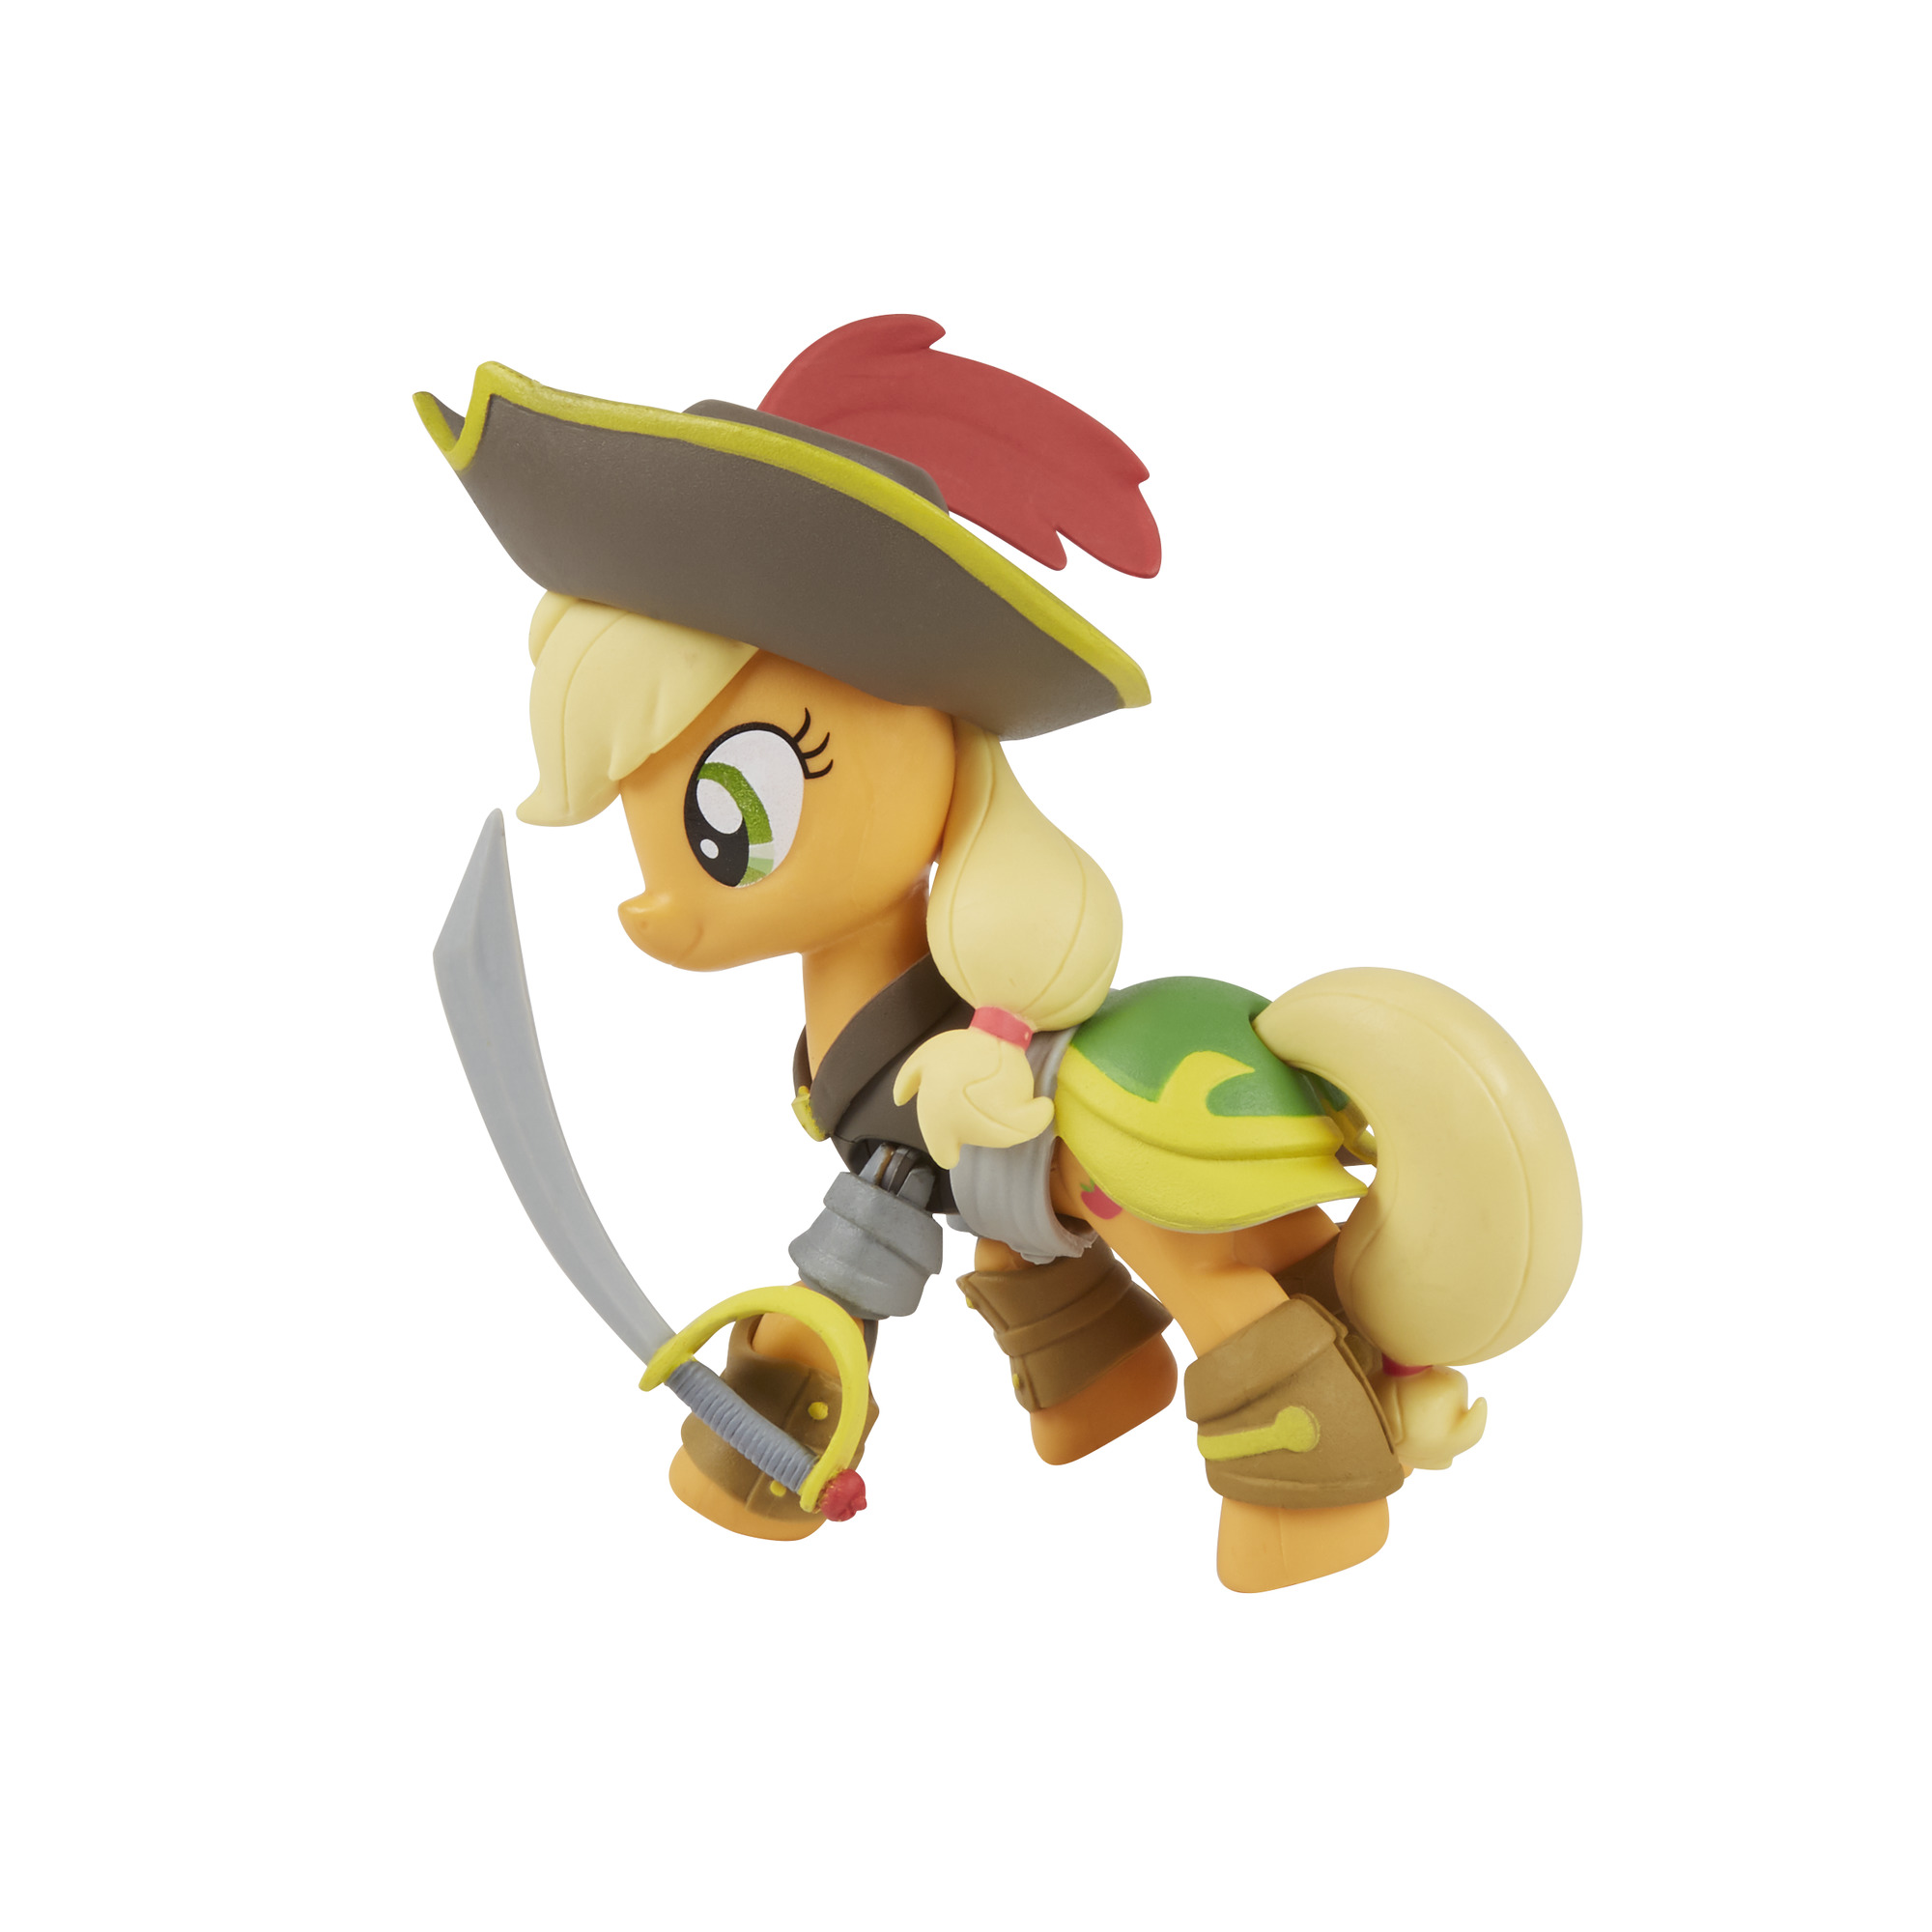 My Little Pony Movie Guardians of Harmony Pirate Power Applejack, Ages 4 and up - image 5 of 7